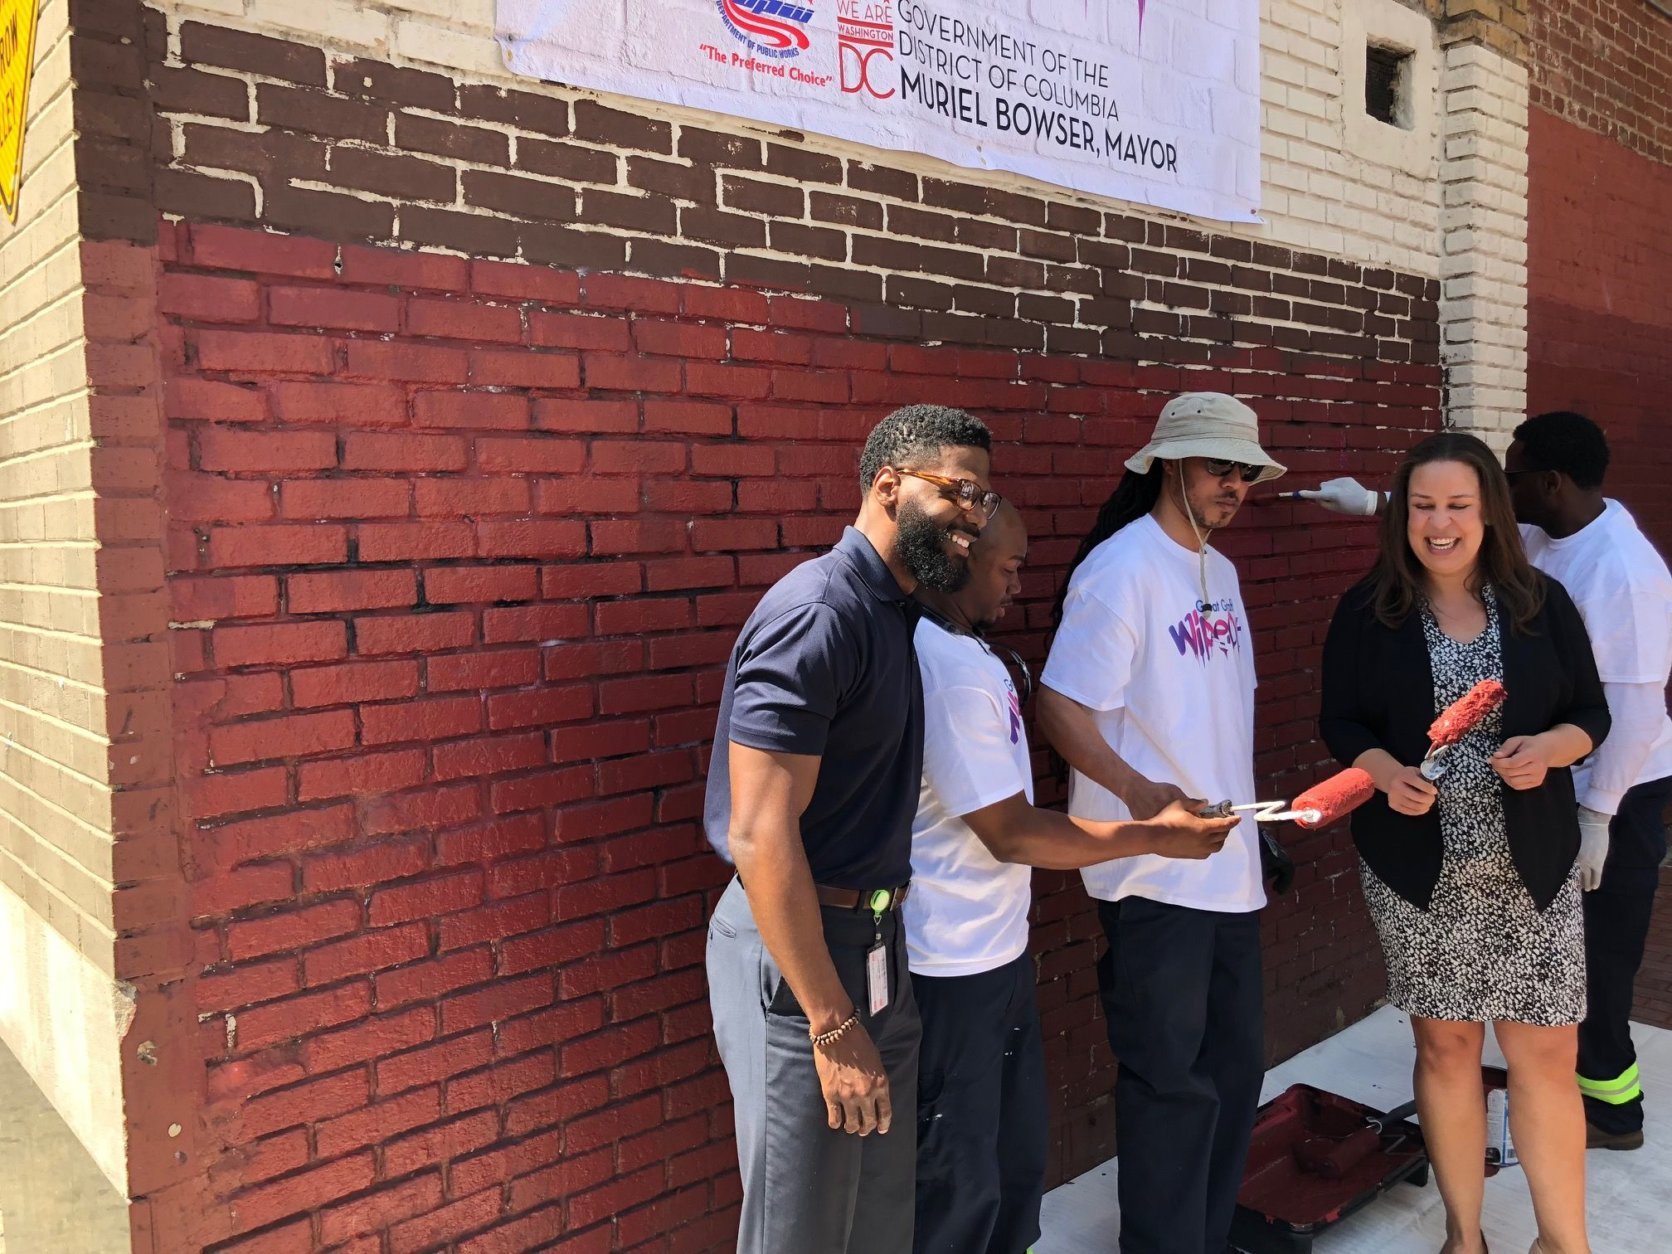 During the 3rd annual Great Graffiti Wipeout, “we’re taking advantage of the warm weather to aggressively eradicate graffiti in all eight wards,” said D.C. Department of Public Works Director Chris Shorter. (WTOP/John Aaron)